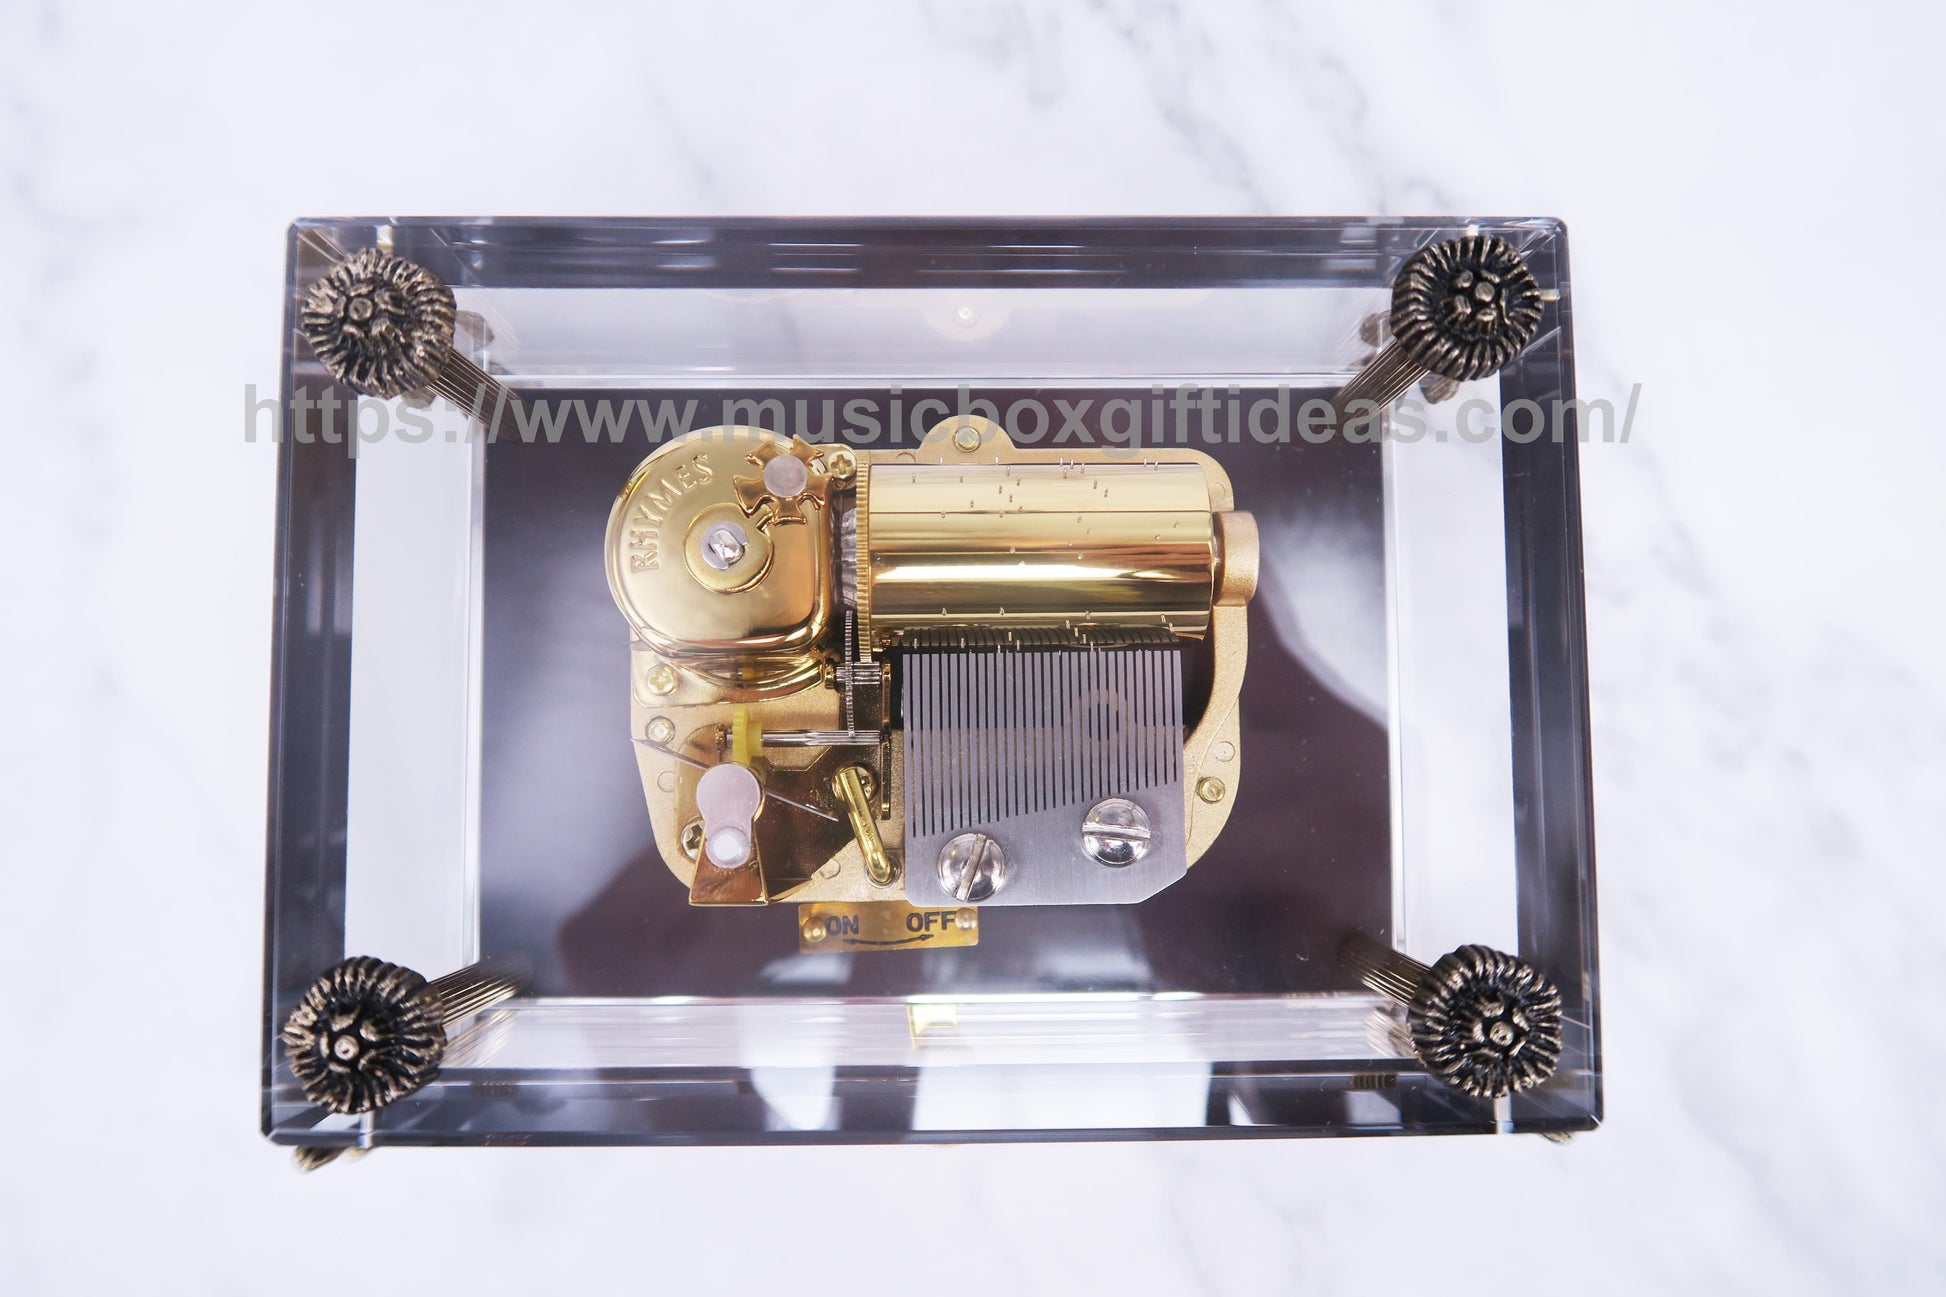 Twilight A Thousand Years from Christina Perri 30-Note Wind-Up Music Box Gift (Crystal) - Music Box Gift Ideas